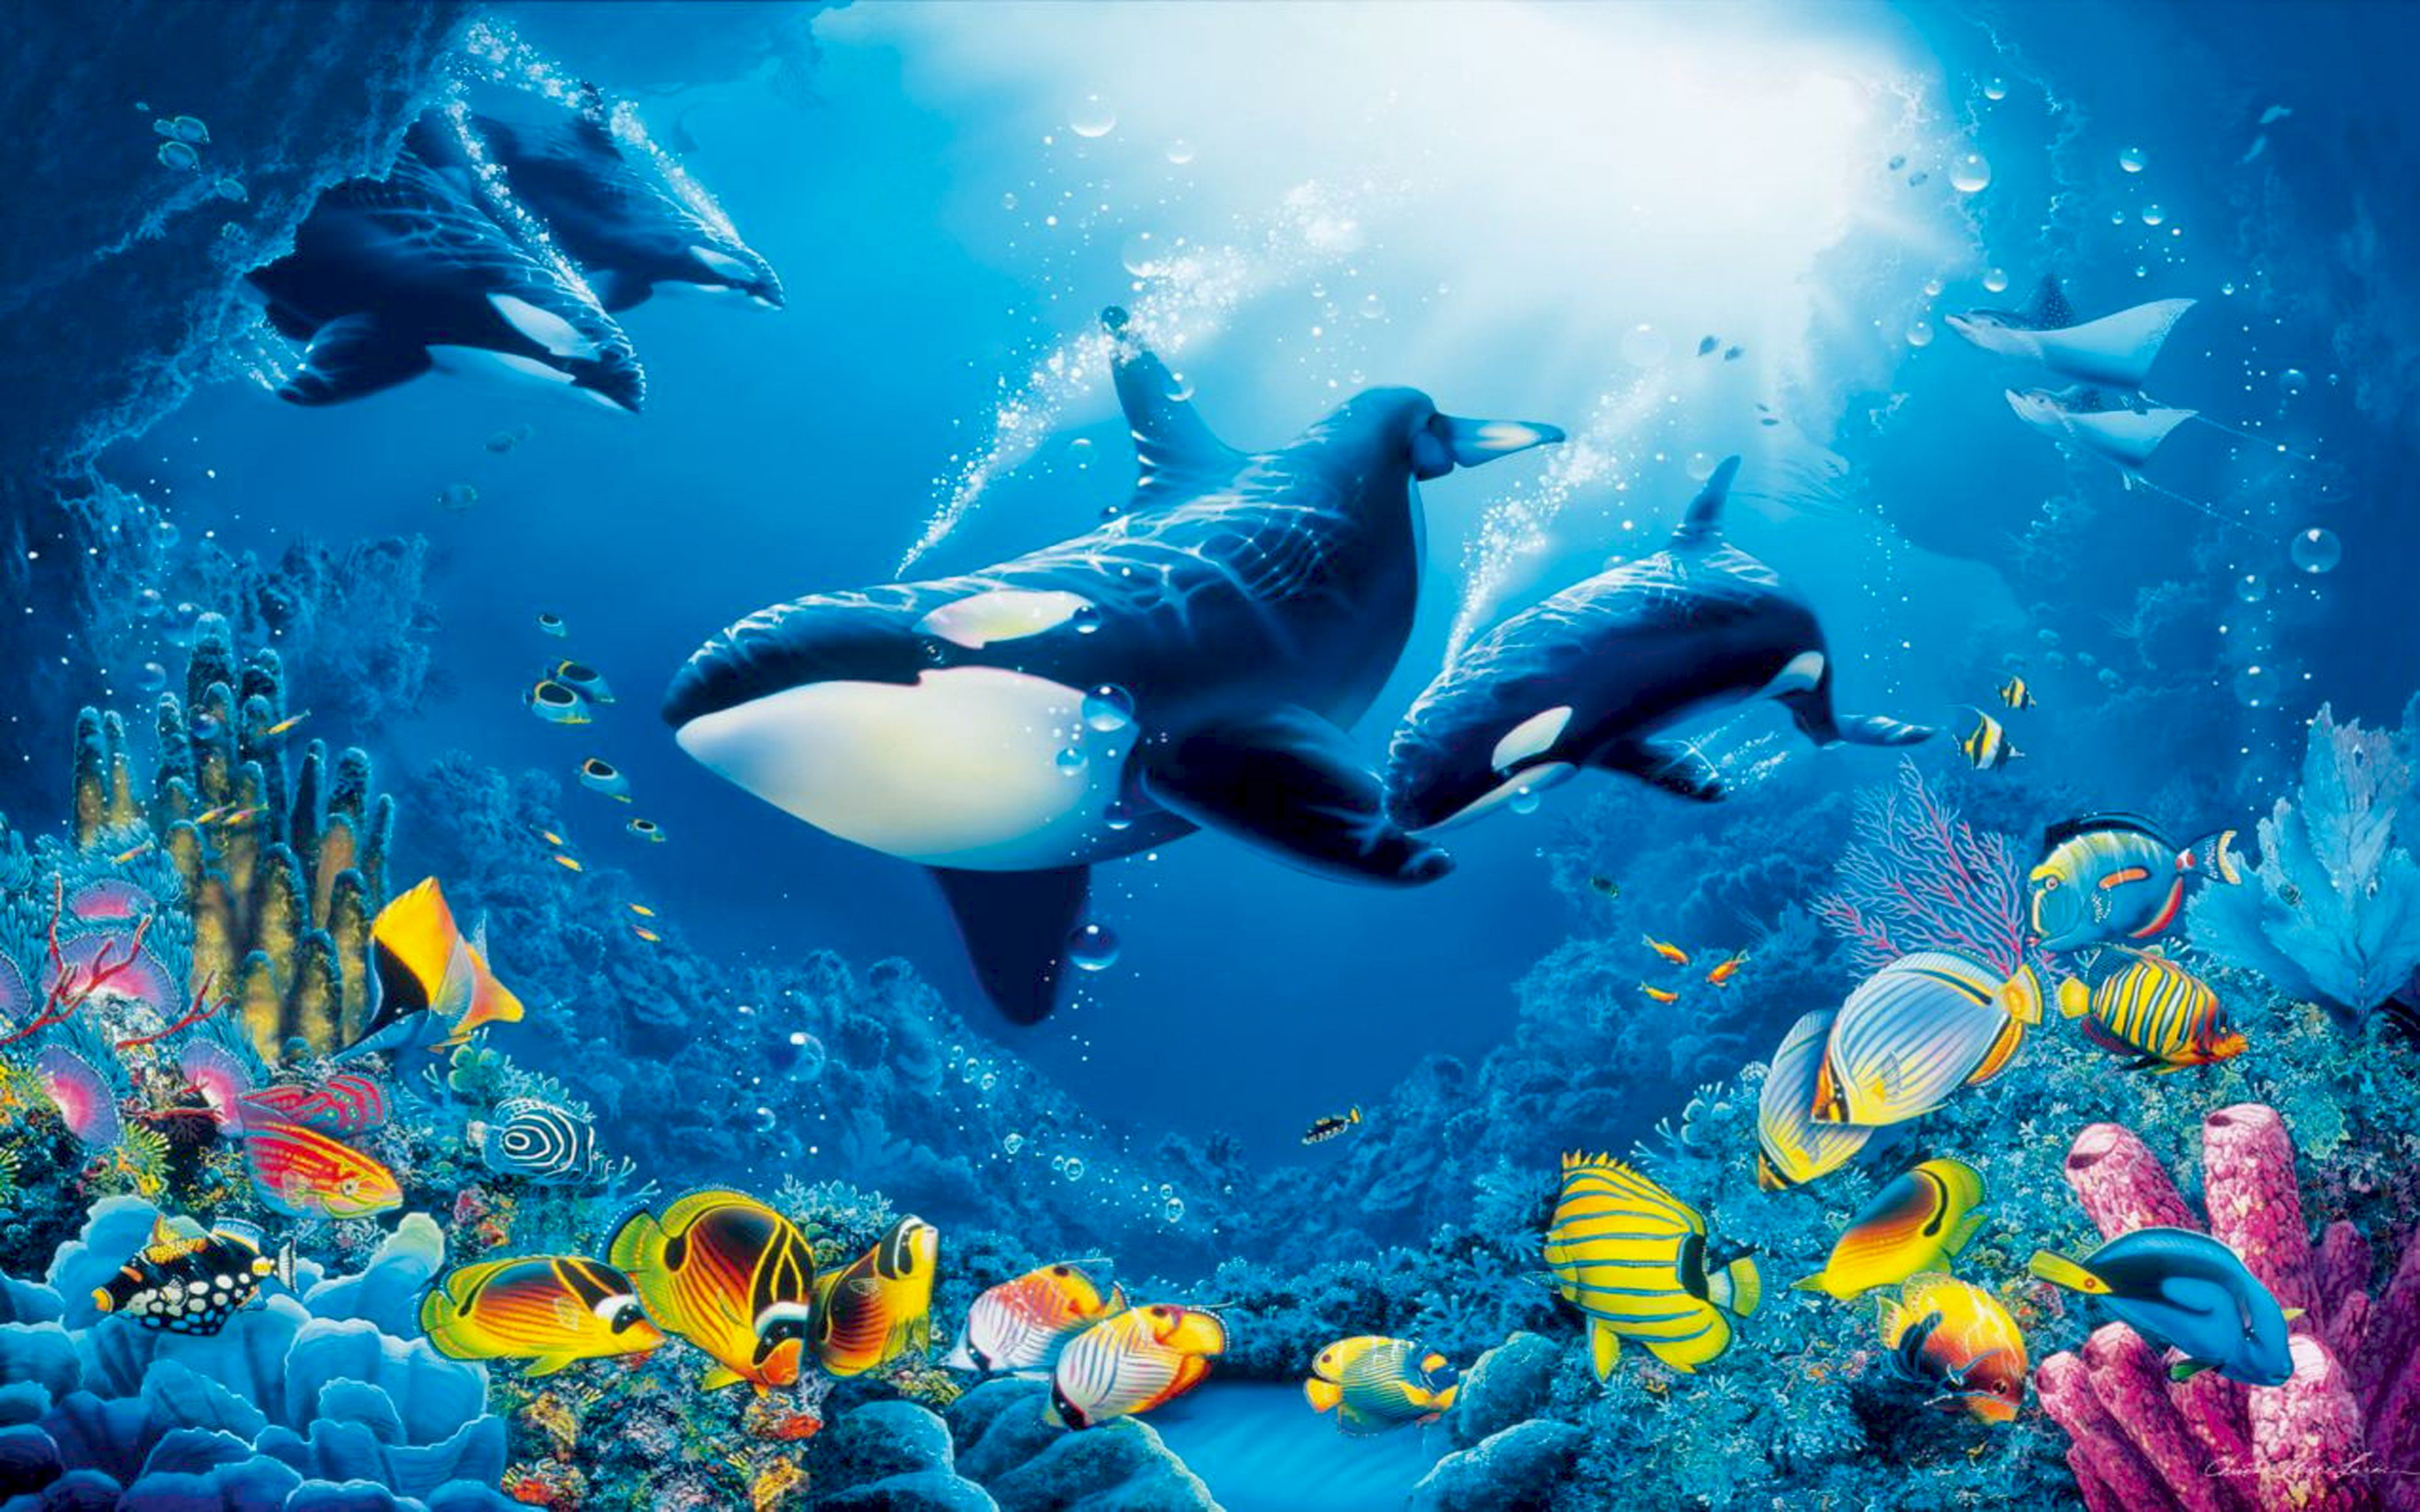 Underwater World, Coral Reef, Colorful Fish Marine Fauna With Ocean Orcas Killer Whales